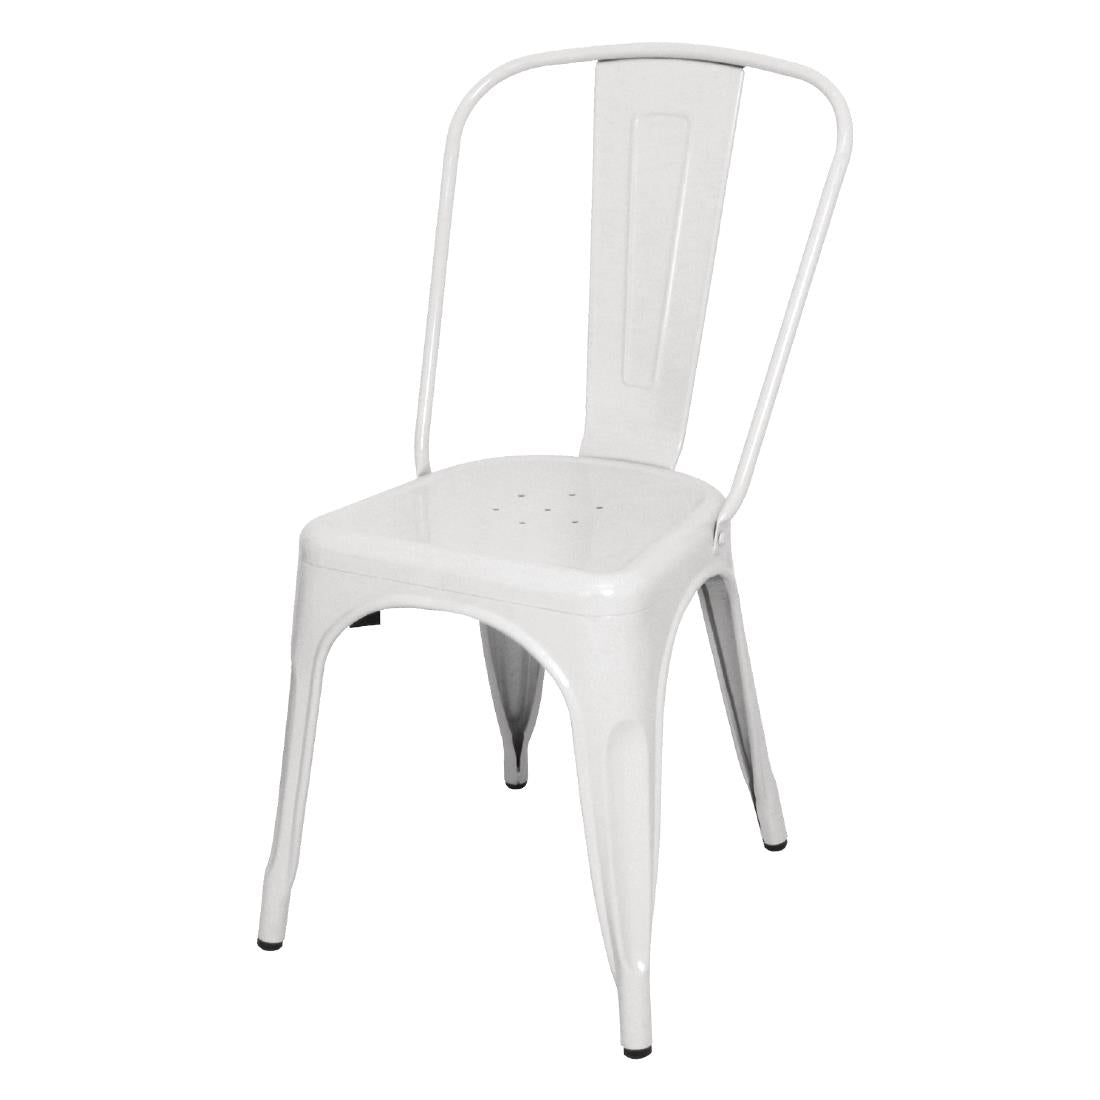 Bolero Bistro Steel Side Chair White (Pack of 4) JD Catering Equipment Solutions Ltd